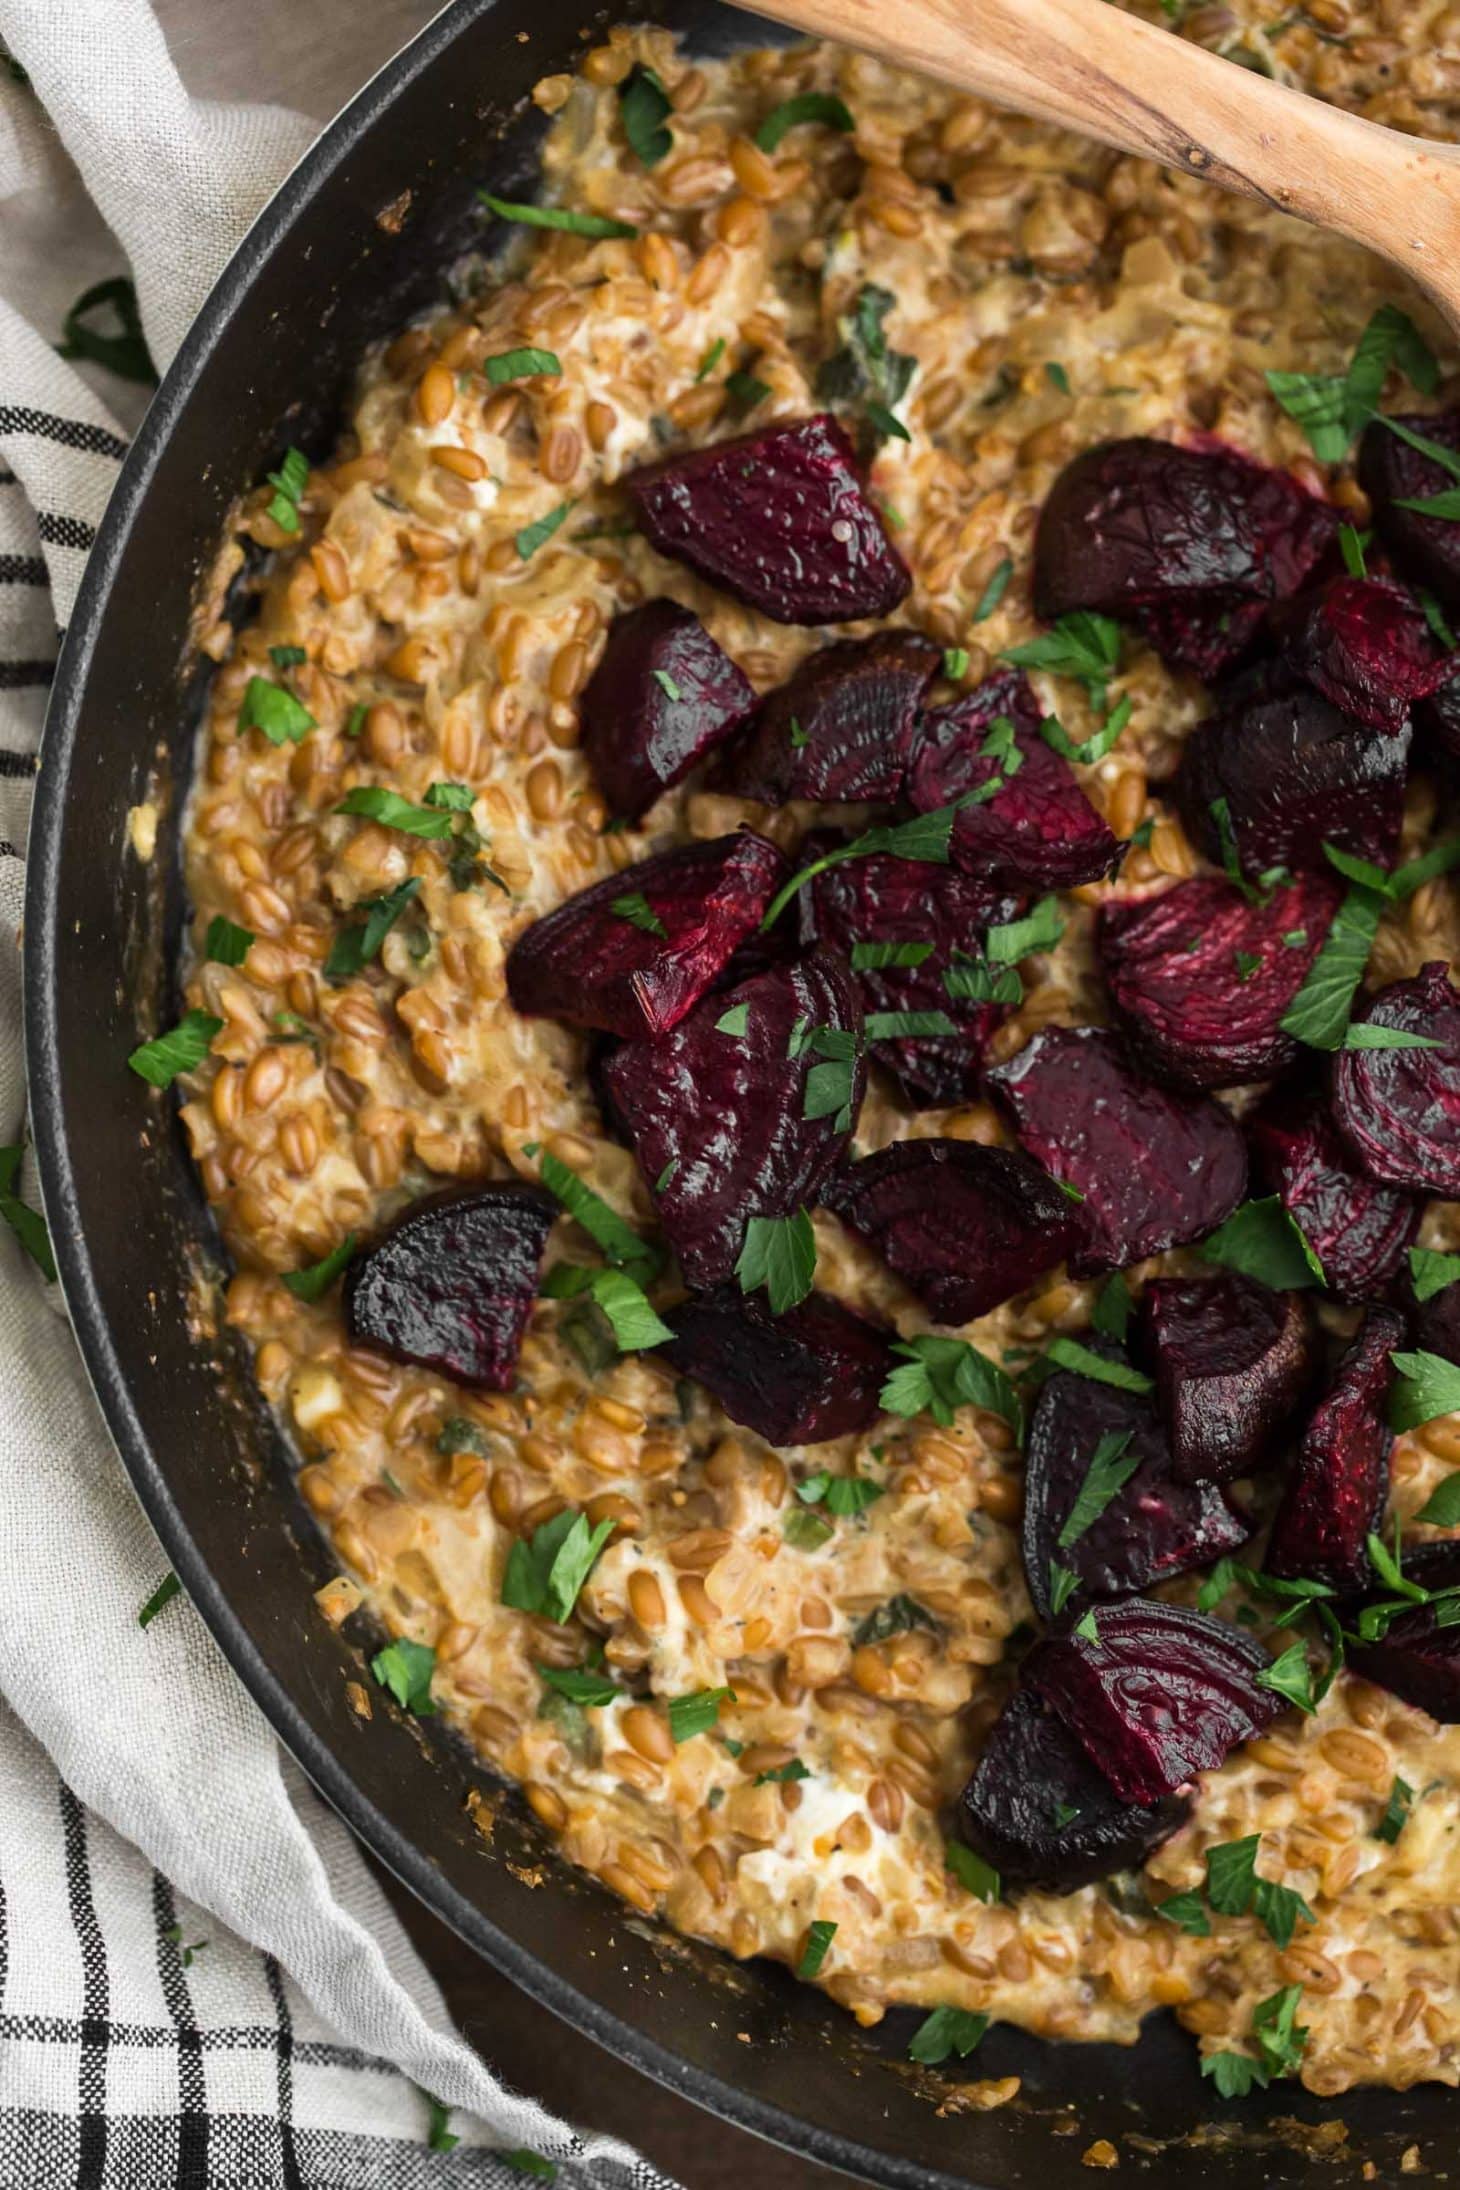 Cracked Spelt Risotto with Roasted Beets | Vegetarian Beet Recipes